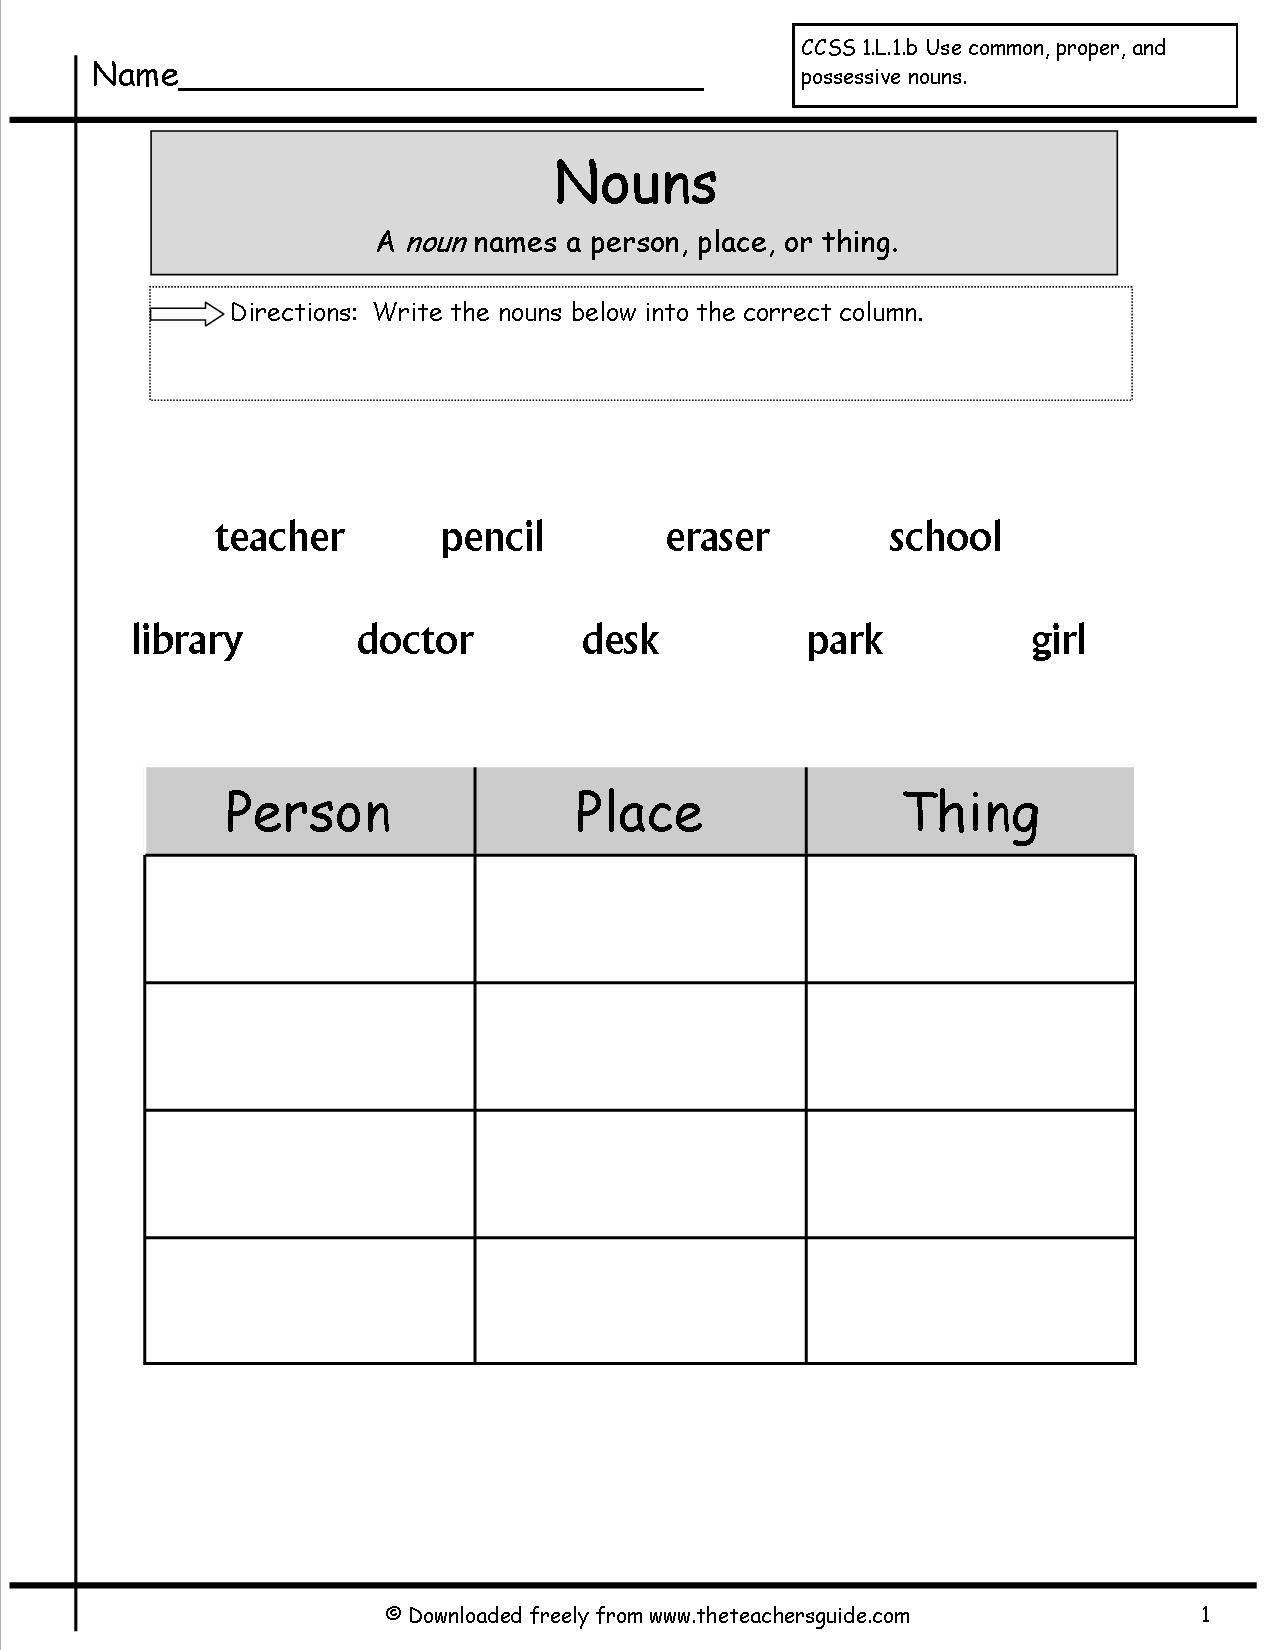 Free Noun Picture Worksheets